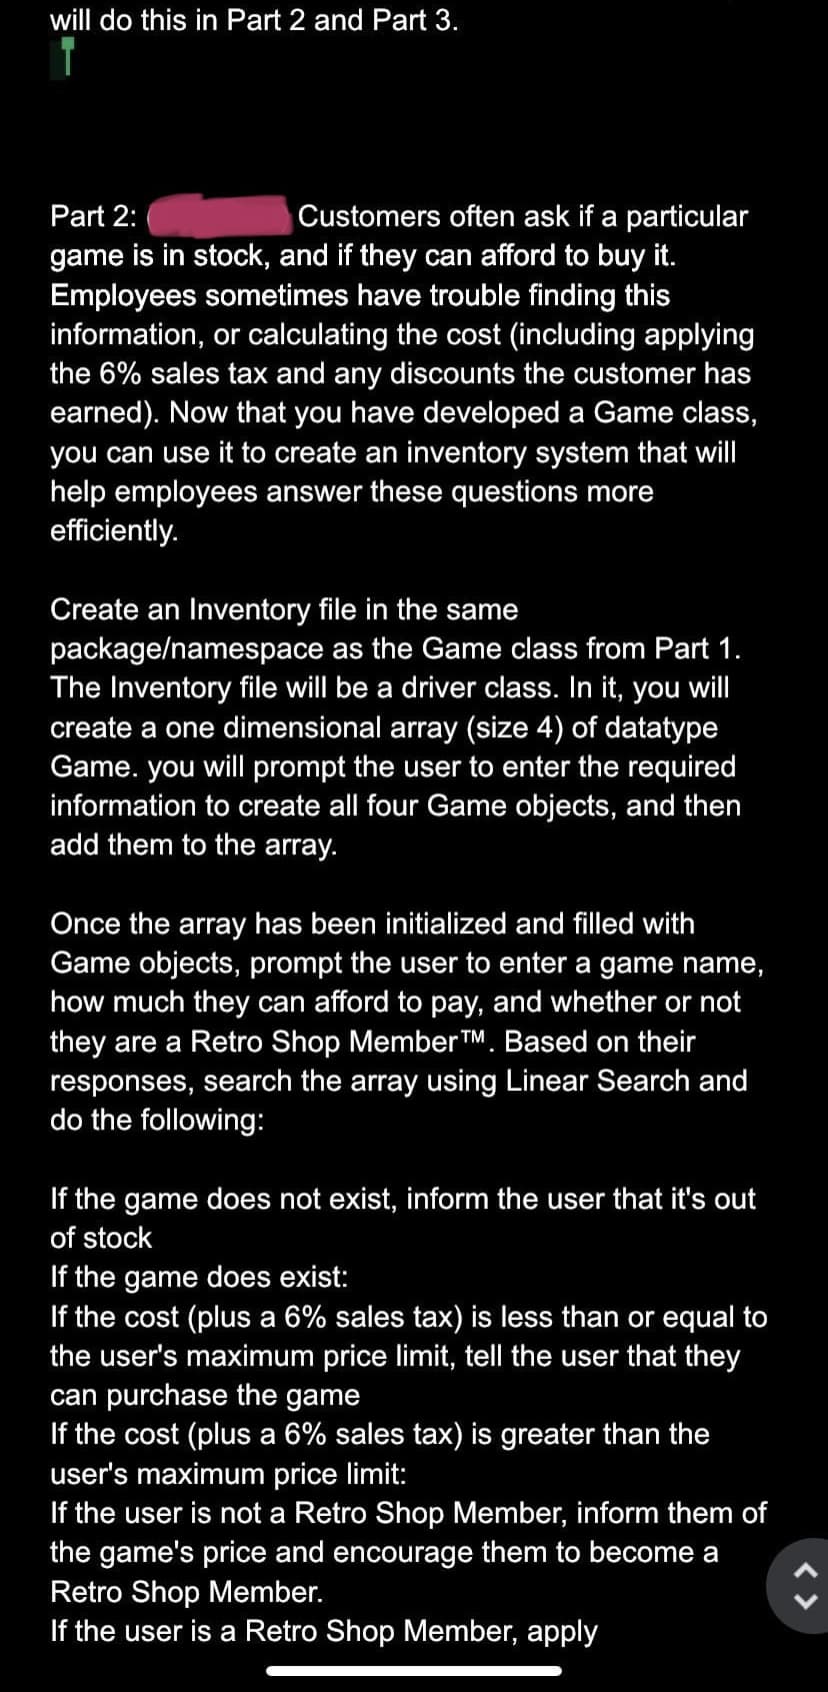 will do this in Part 2 and Part 3.
Part 2:
Customers often ask if a particular
game is in stock, and if they can afford to buy it.
Employees sometimes have trouble finding this
information, or calculating the cost (including applying
the 6% sales tax and any discounts the customer has
earned). Now that you have developed a Game class,
you can use it to create an inventory system that will
help employees answer these questions more
efficiently.
Create an Inventory file in the same
package/namespace as the Game class from Part 1.
The Inventory file will be a driver class. In it, you will
create a one dimensional array (size 4) of datatype
Game. you will prompt the user to enter the required
information to create all four Game objects, and then
add them to the array.
Once the array has been initialized and filled with
Game objects, prompt the user to enter a game name,
how much they can afford to pay, and whether or not
they are a Retro Shop Member TM. Based on their
responses, search the array using Linear Search and
do the following:
If the game does not exist, inform the user that it's out
of stock
If the game does exist:
If the cost (plus a 6% sales tax) is less than or equal to
the user's maximum price limit, tell the user that they
can purchase the game
If the cost (plus a 6% sales tax) is greater than the
user's maximum price limit:
If the user is not a Retro Shop Member, inform them of
the game's price and encourage them to become a
Retro Shop Member.
If the user is a Retro Shop Member, apply
